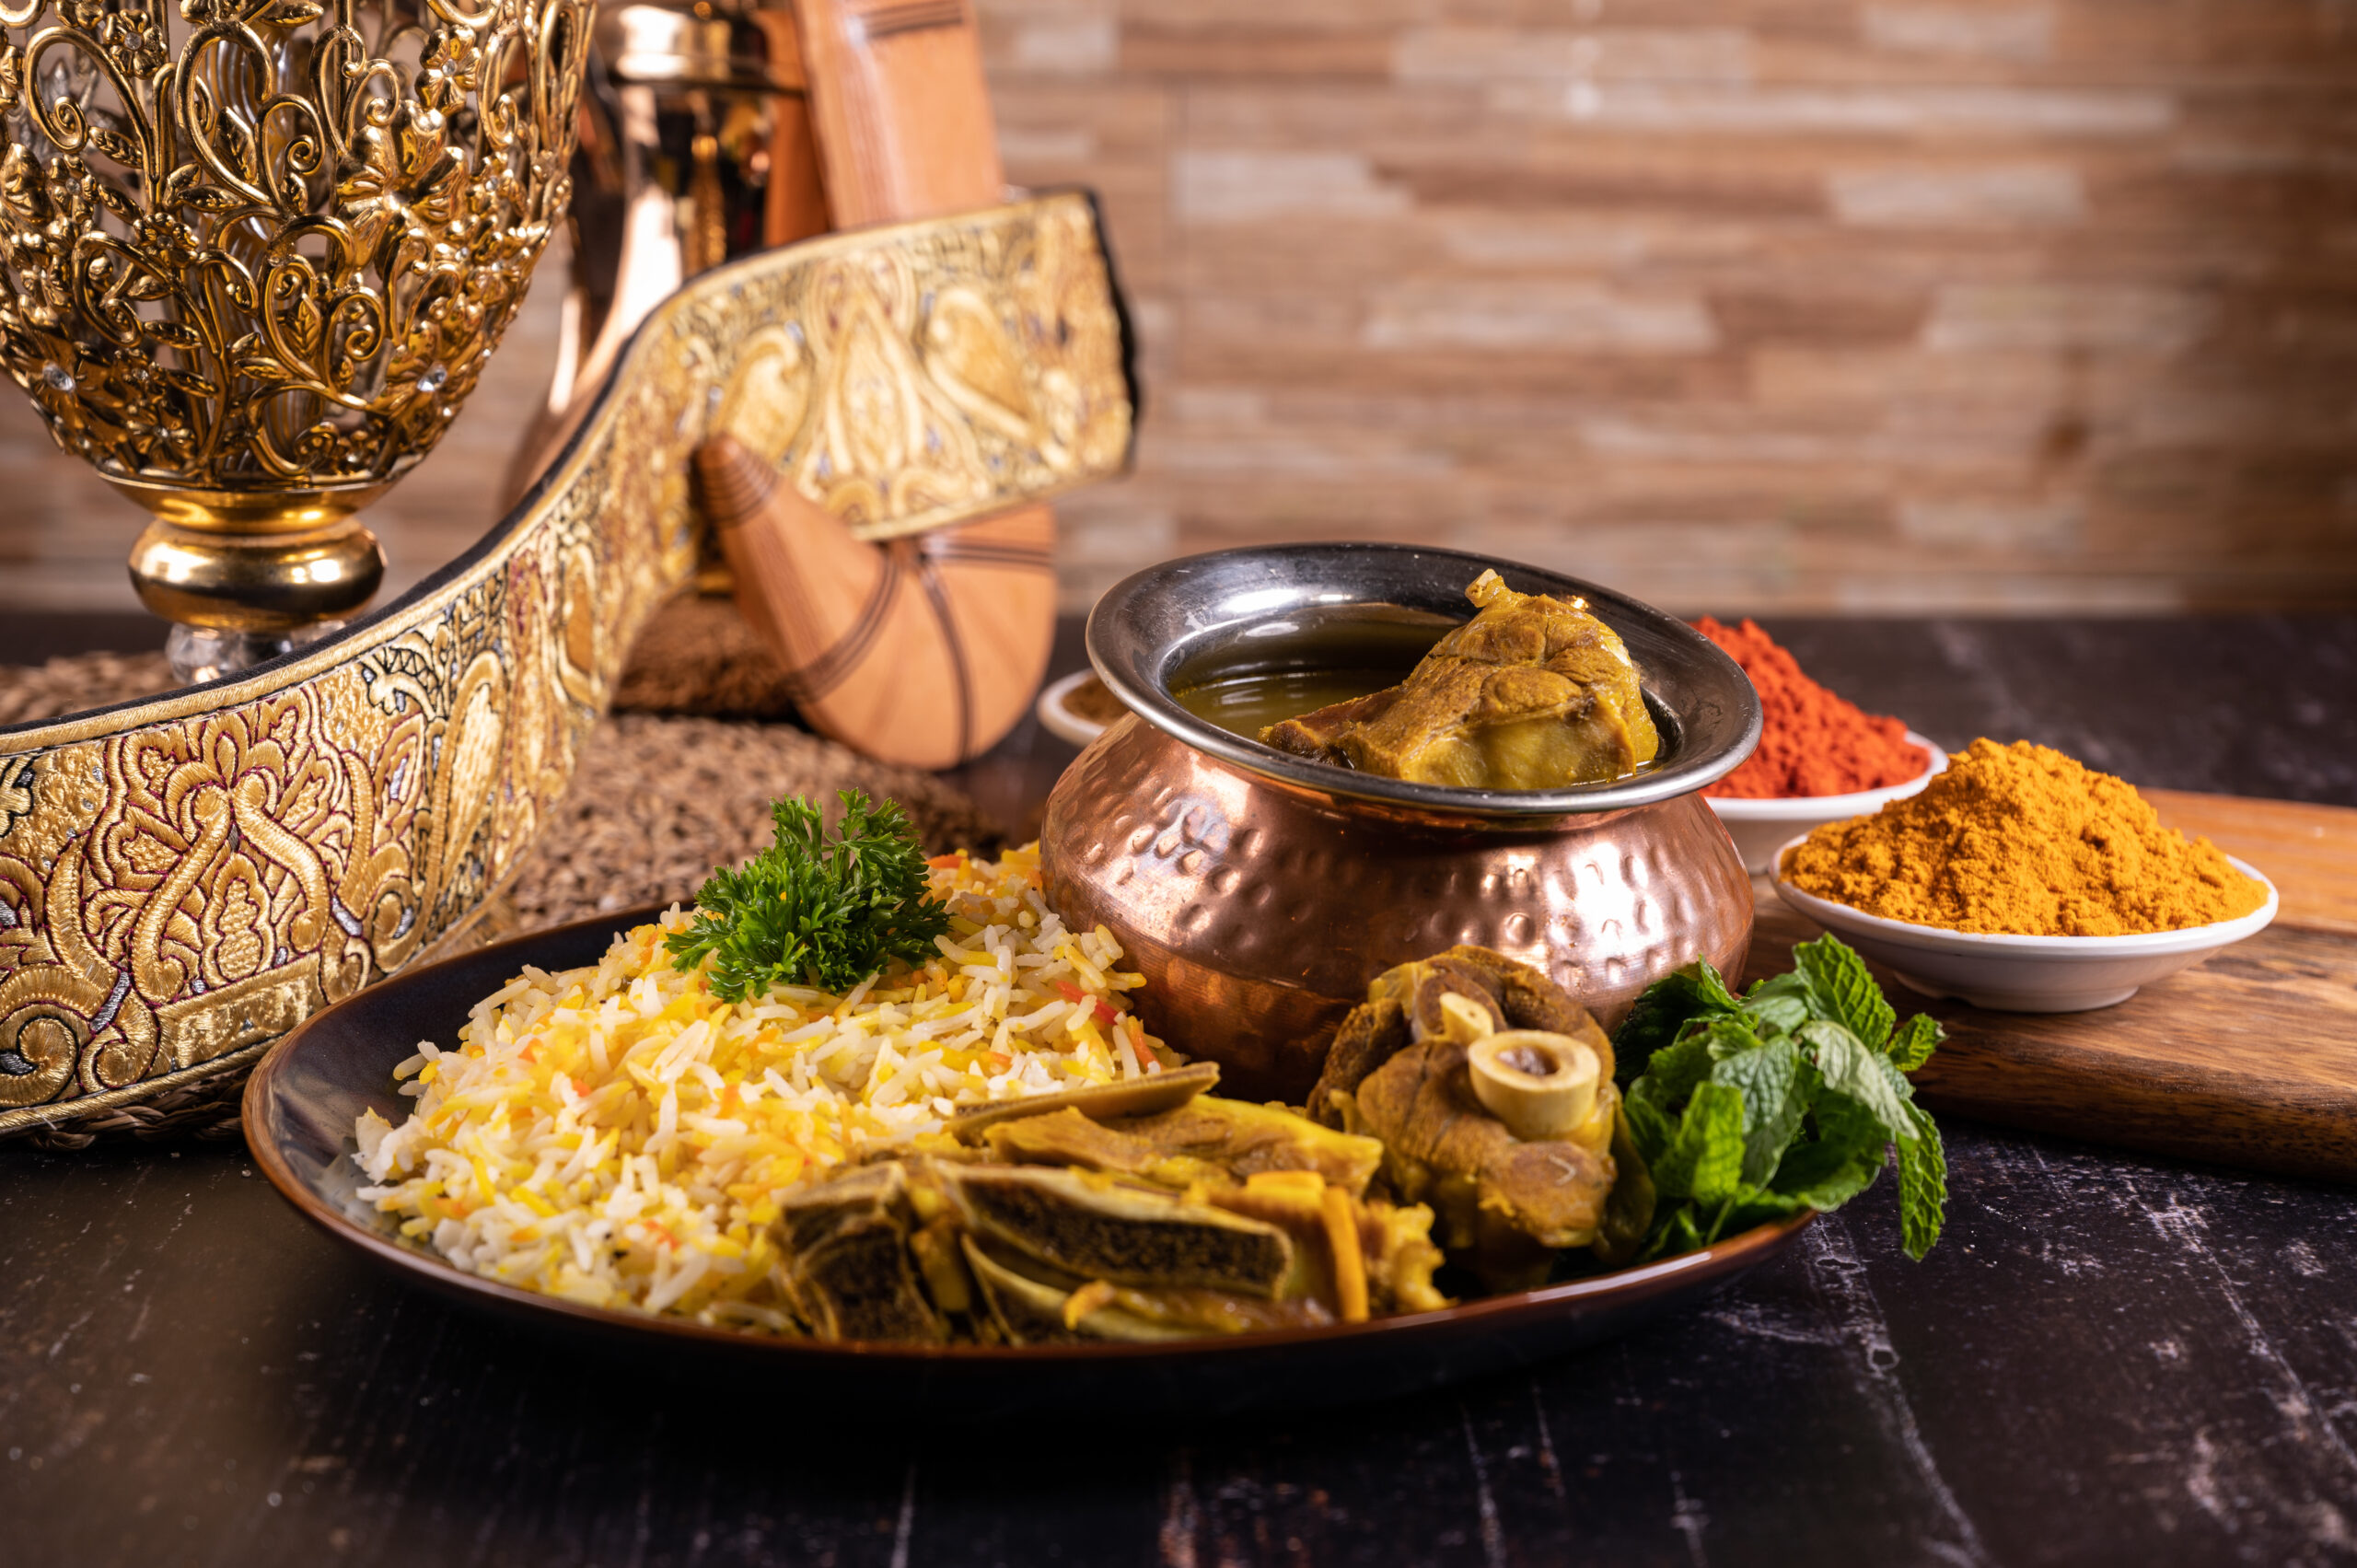 Why not take your Arabic learning in the direction of food? Yemeni cuisine is one a kind. Learn all about Zurbian, Shafout, and so much more.